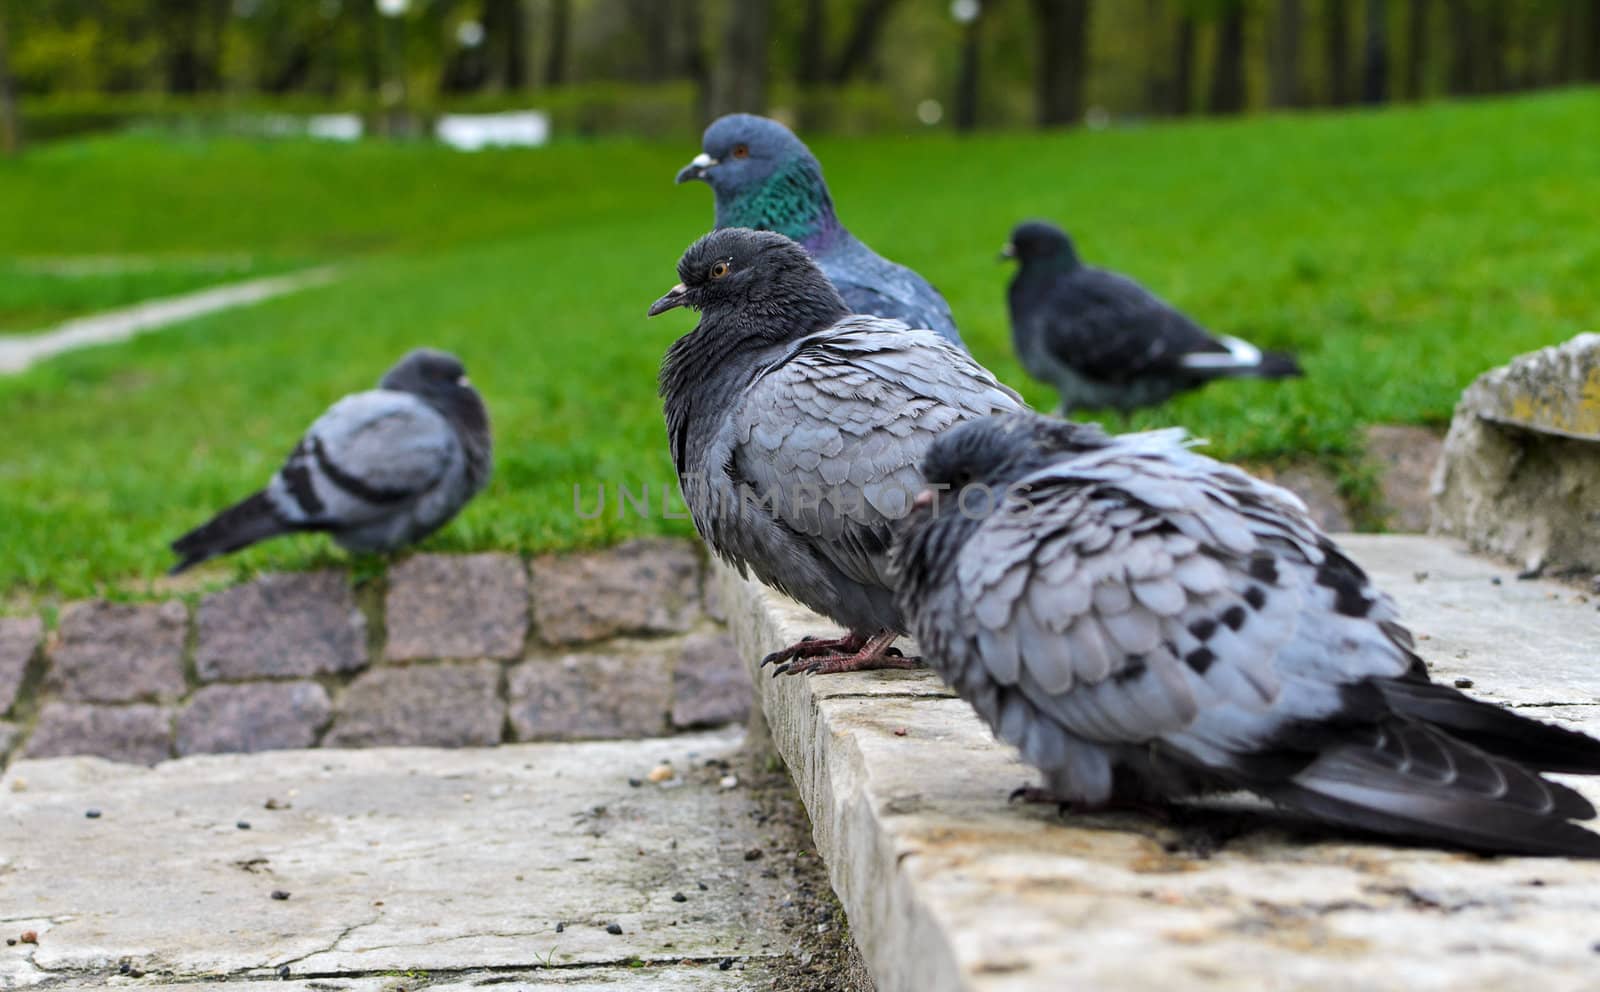 Many pigeons in the park.